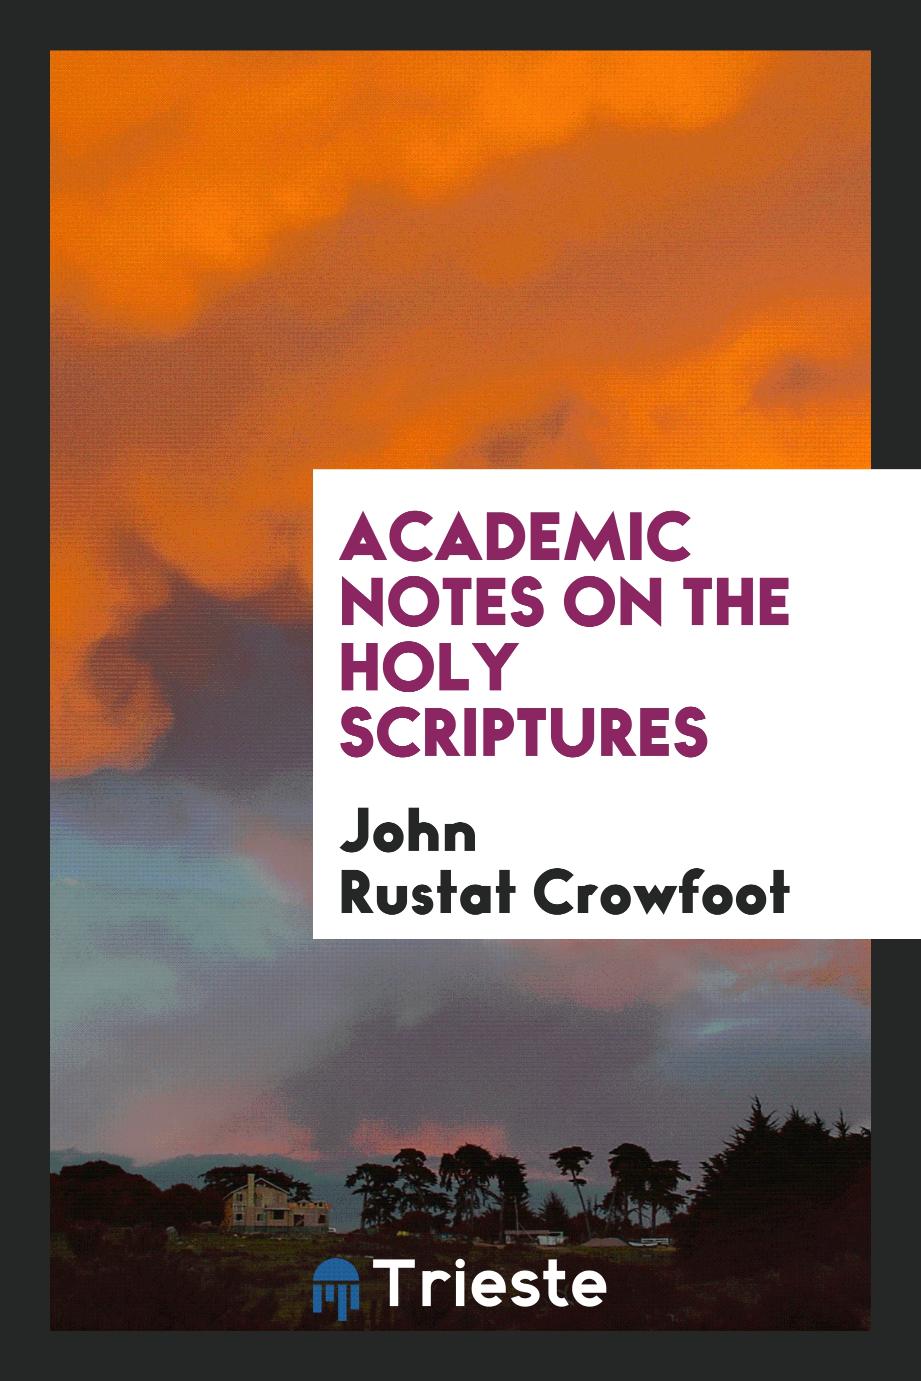 Academic notes on the Holy Scriptures